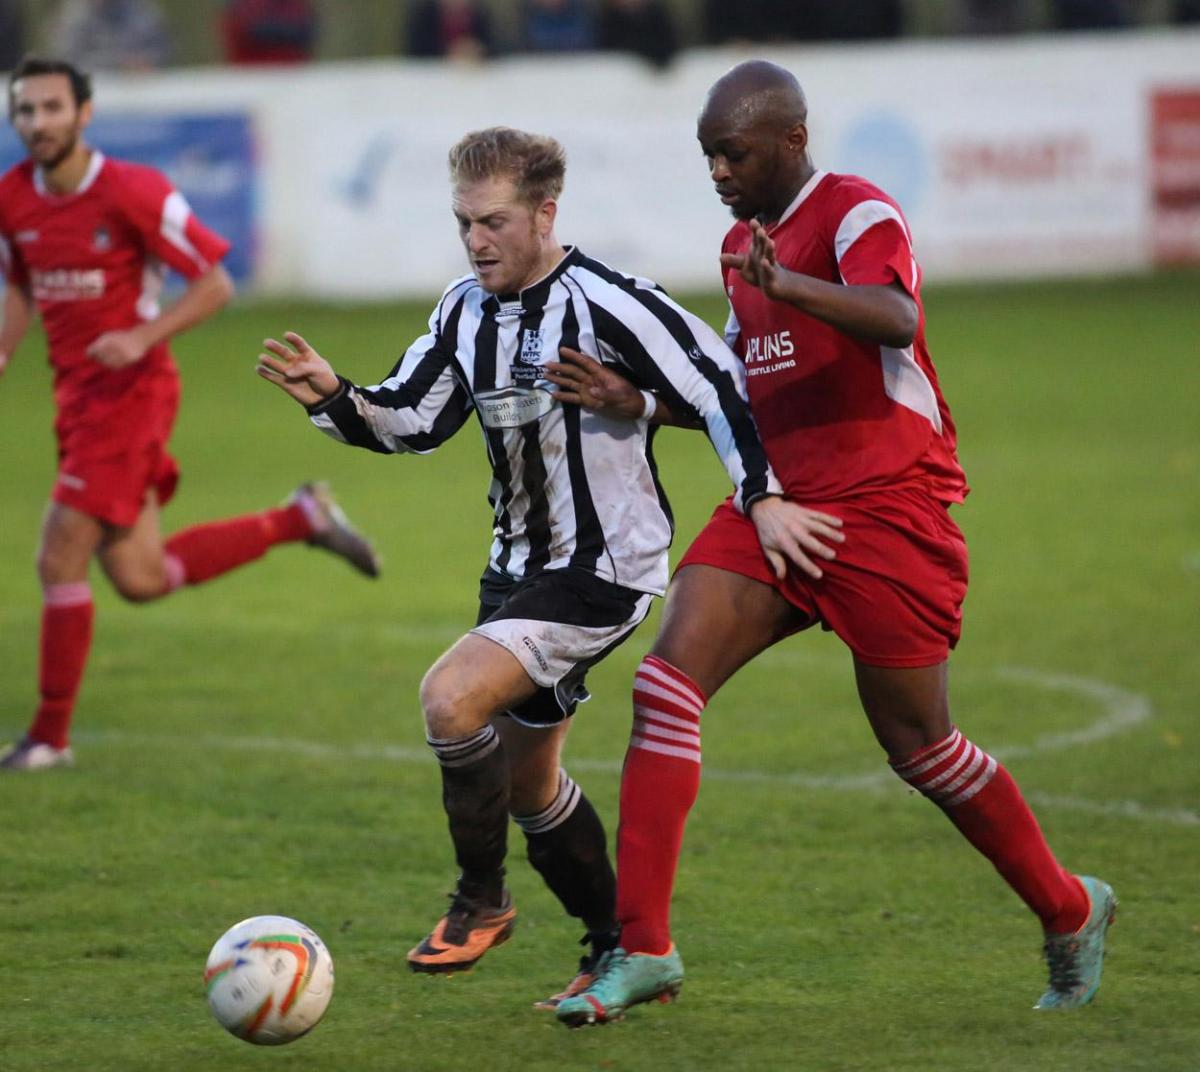 All our pictures of Wimborne Town v Northwood FC on 15th November 2014 by Richard Crease. 